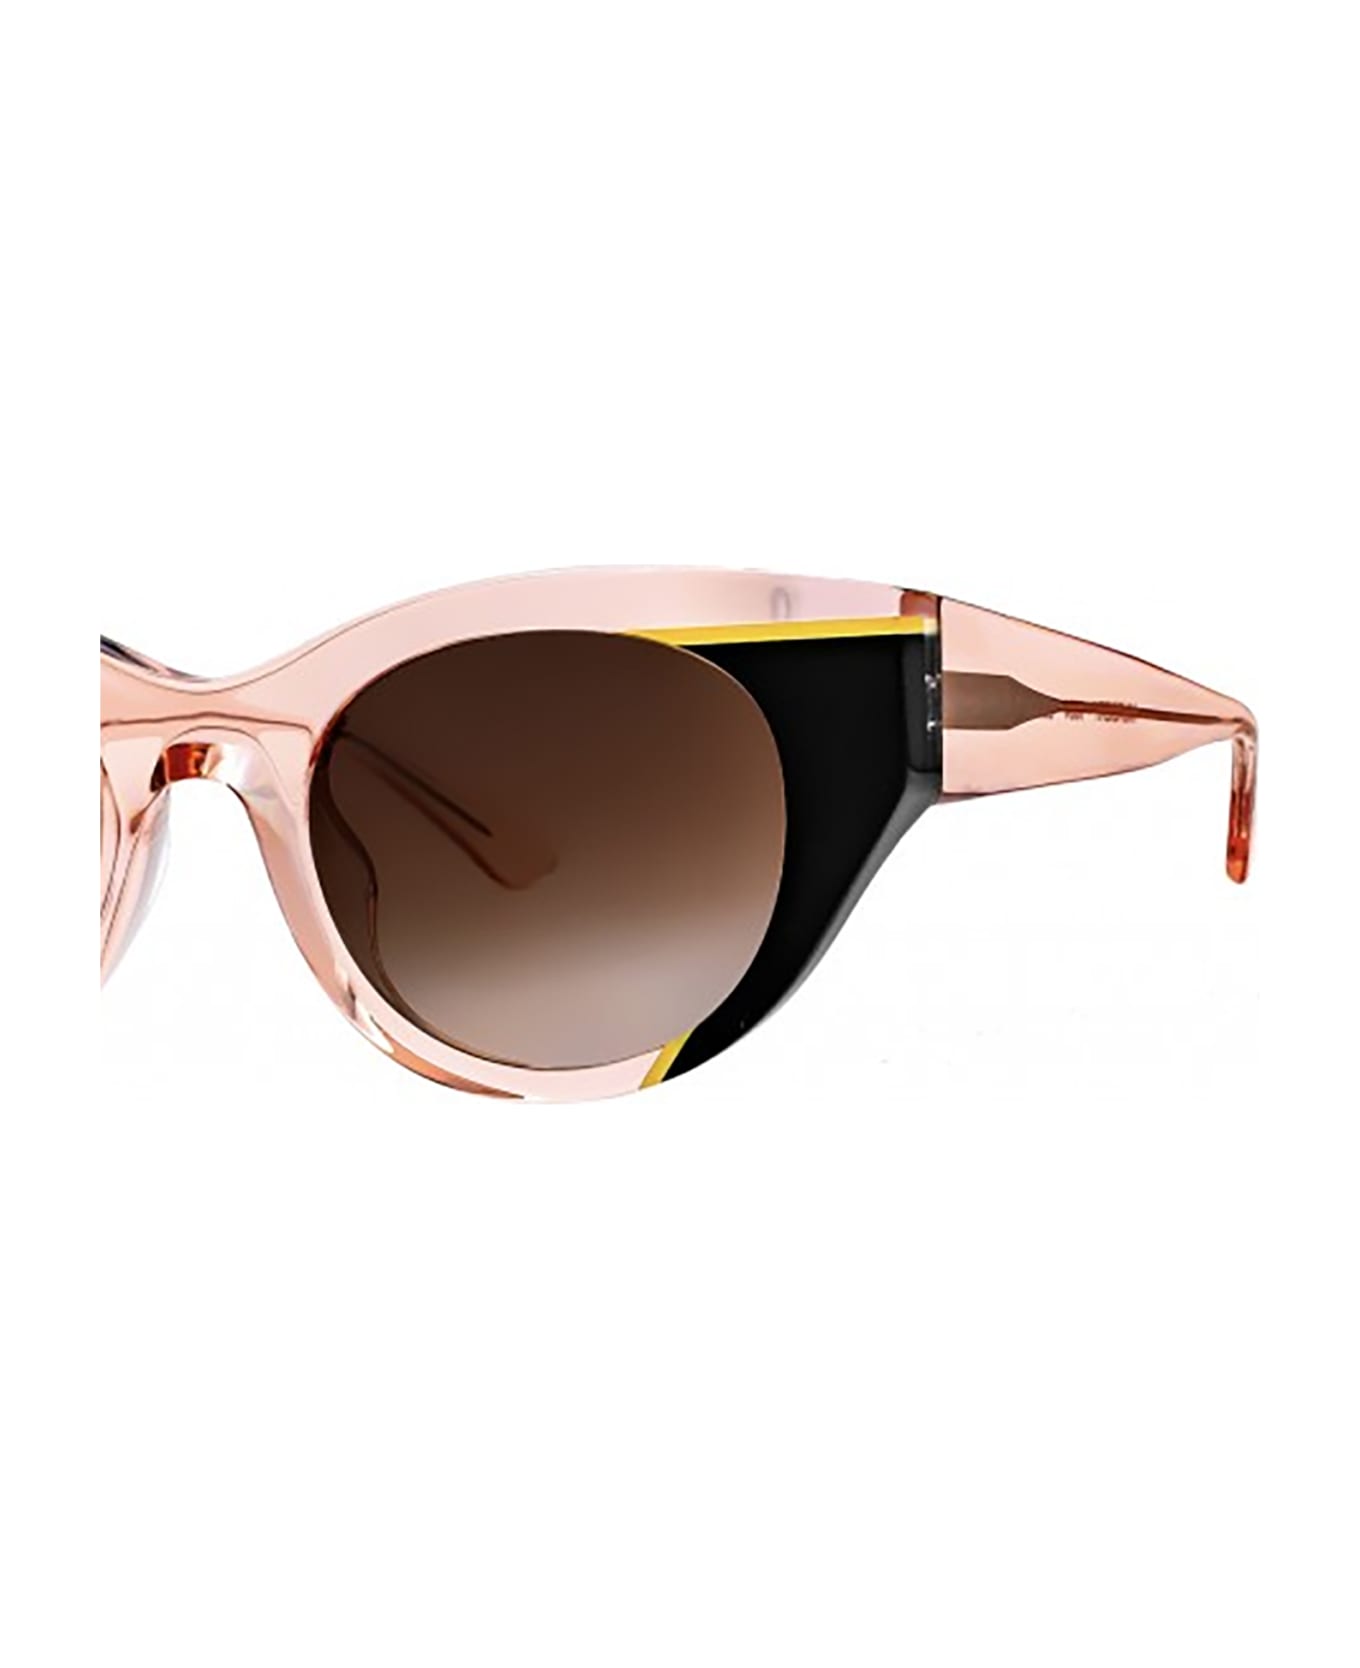 Thierry Lasry MURDERY Sunglasses